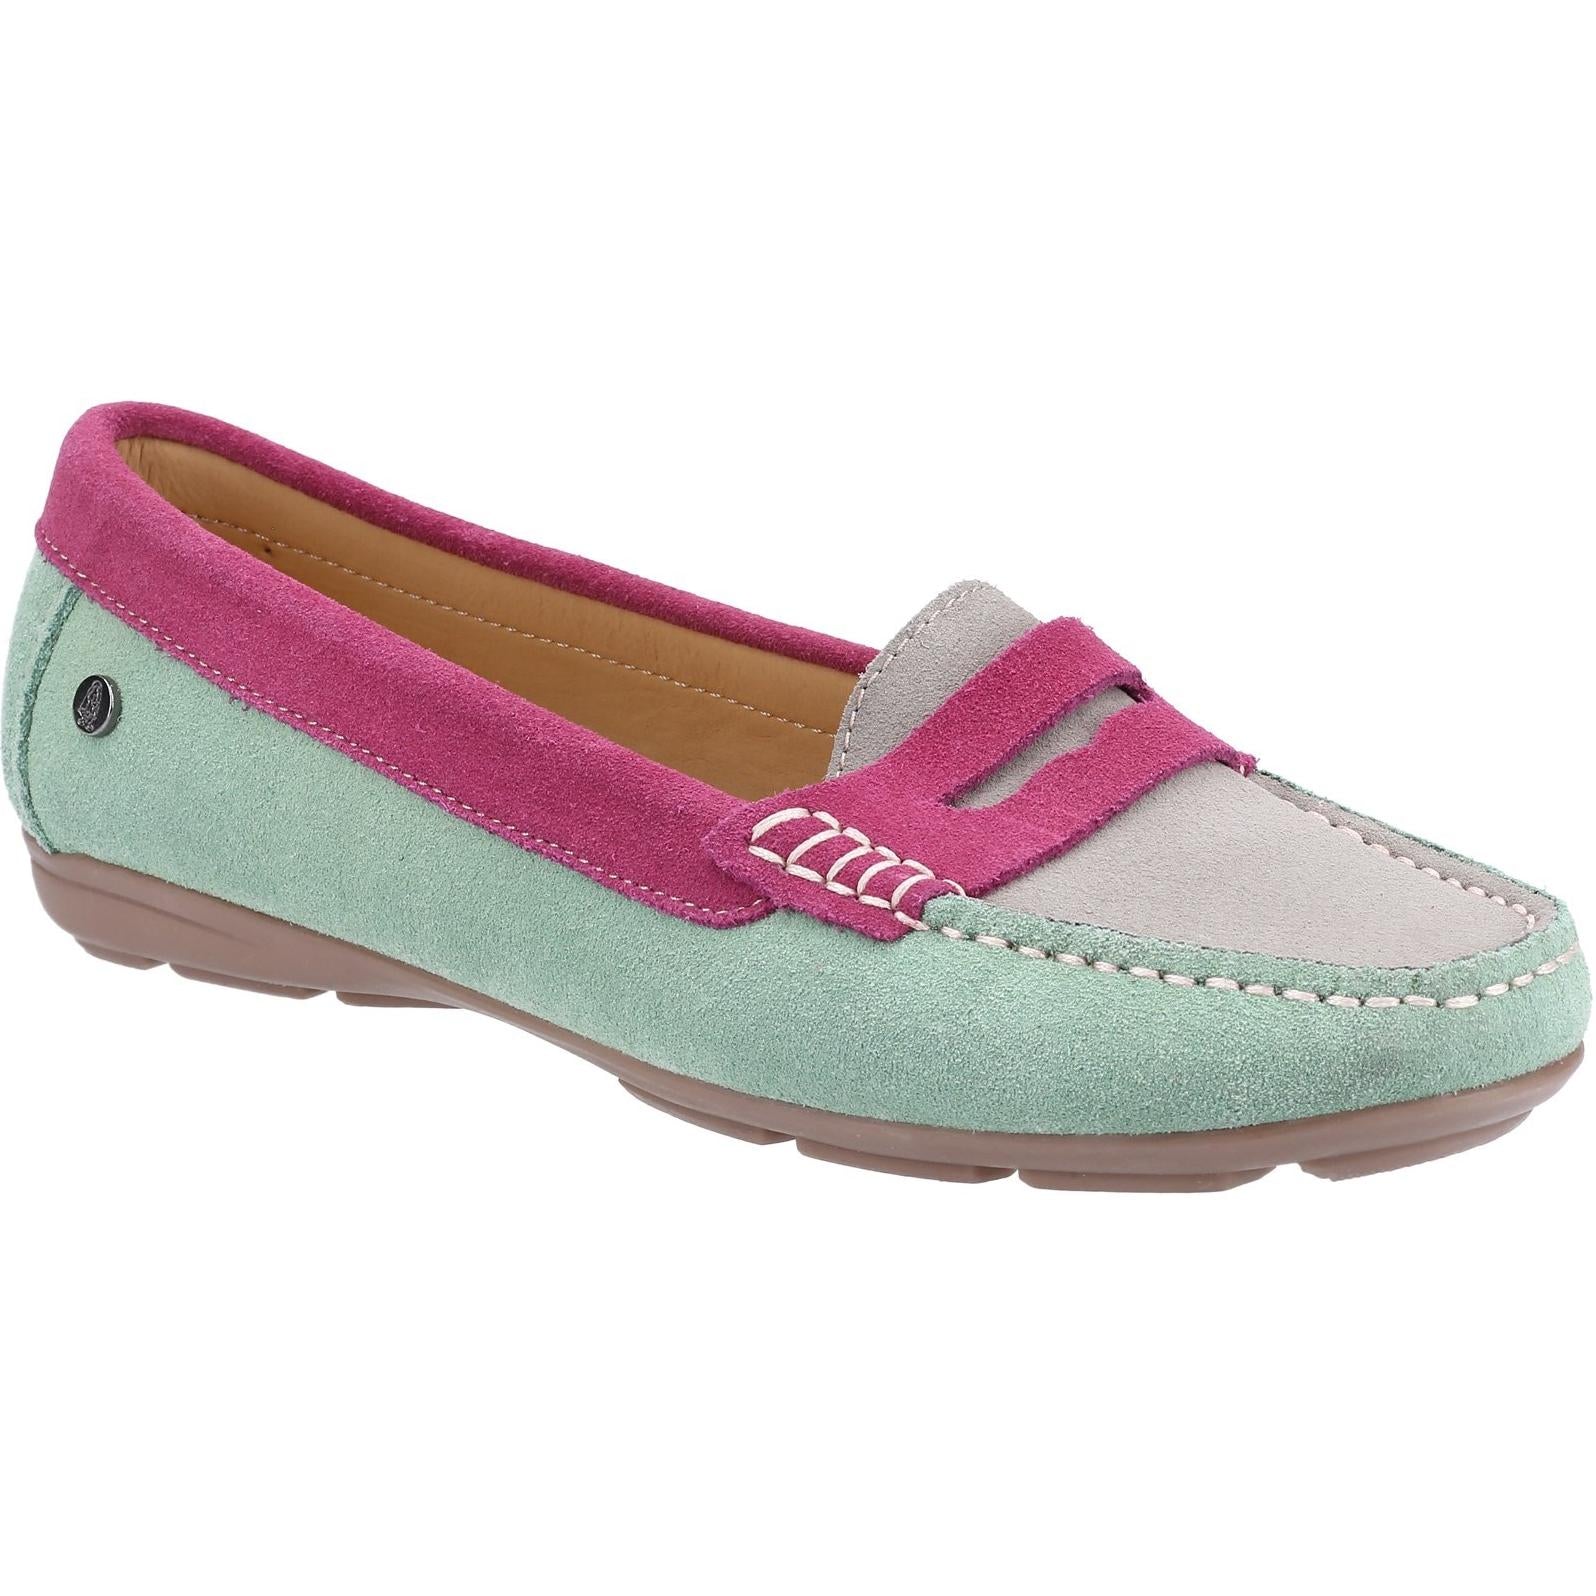 Hush Puppies Margot Multi Loafer Shoes